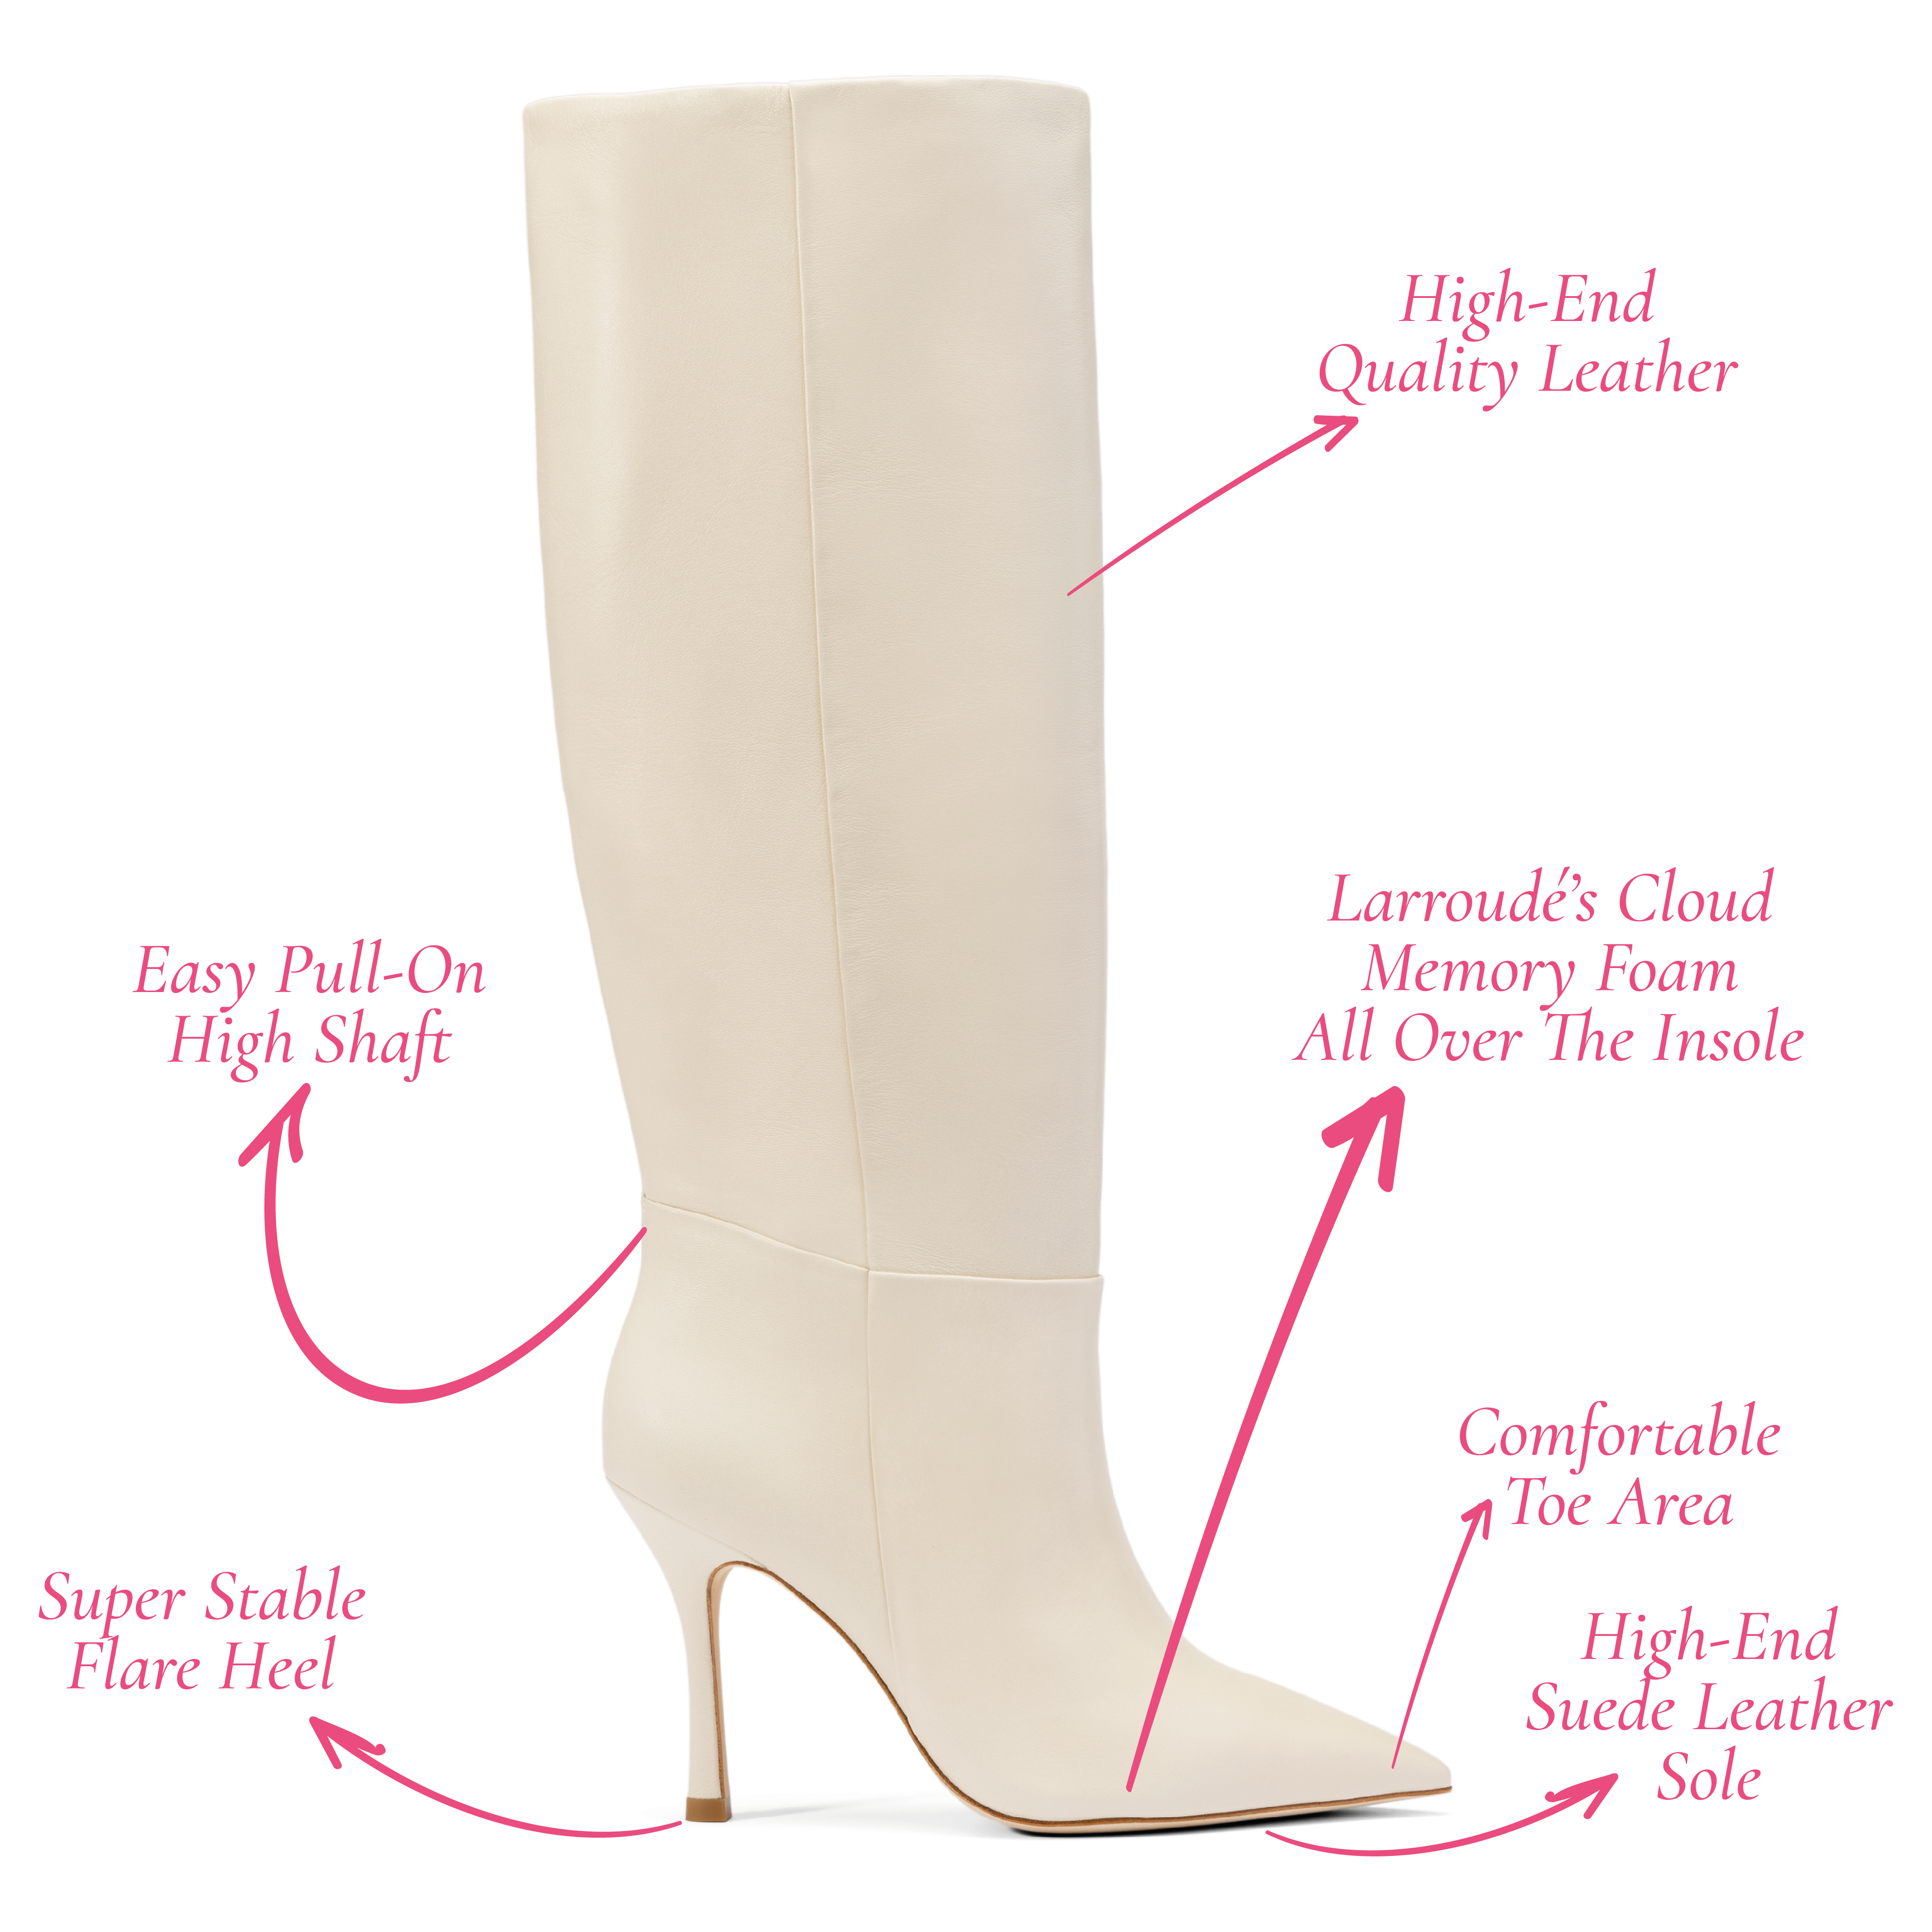 Kate Boot In Ivory Leather